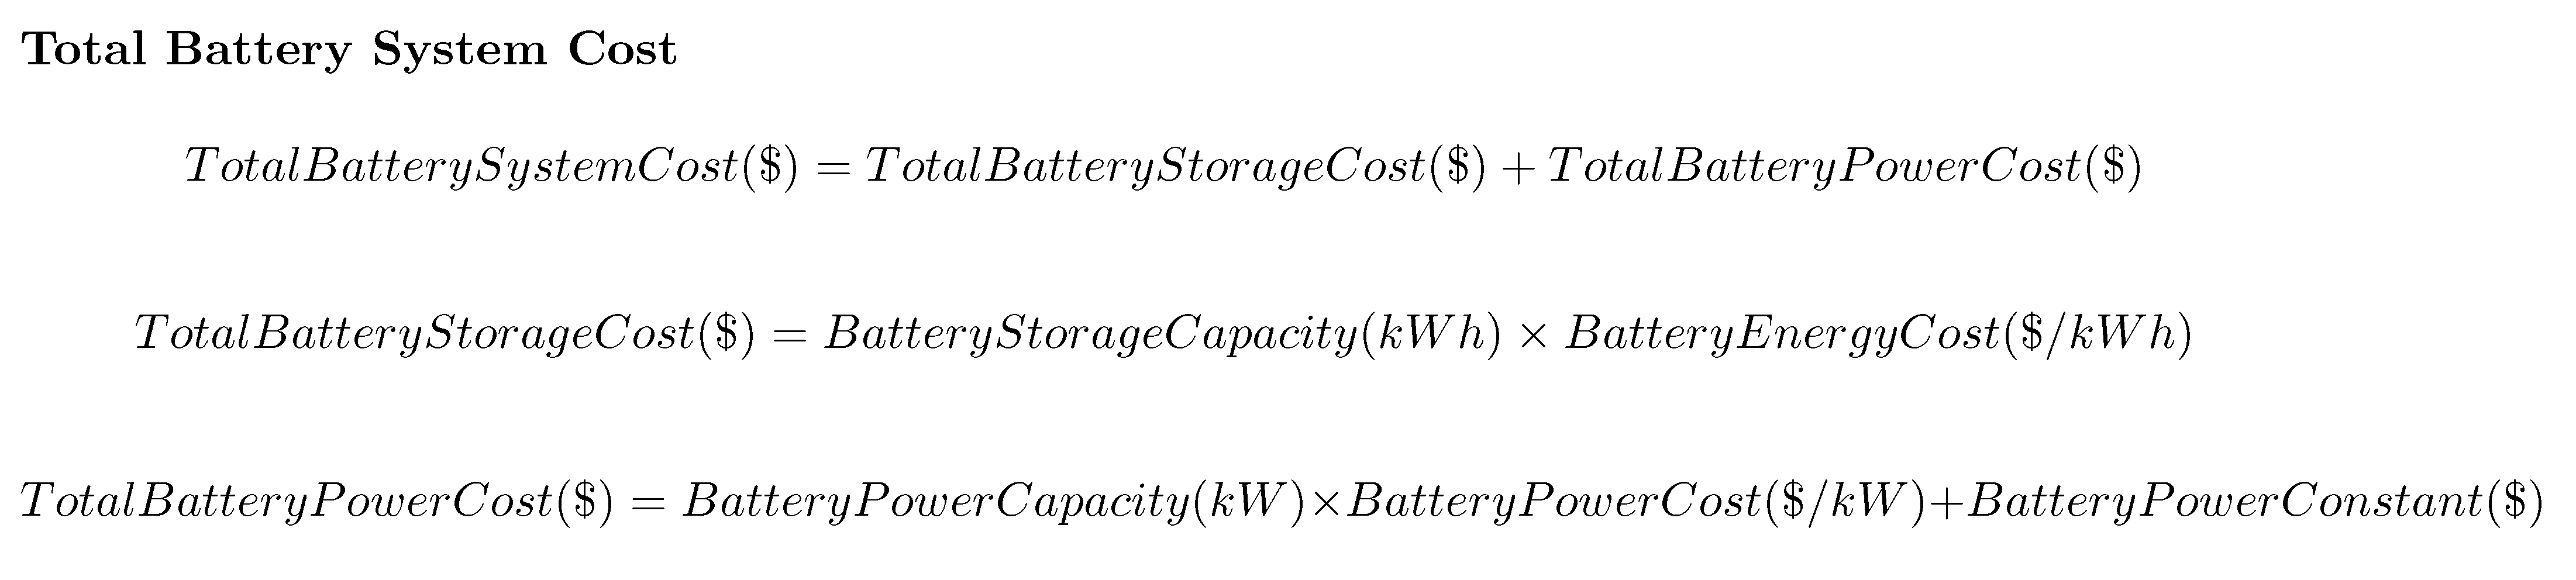 Total Battery System Cost equations